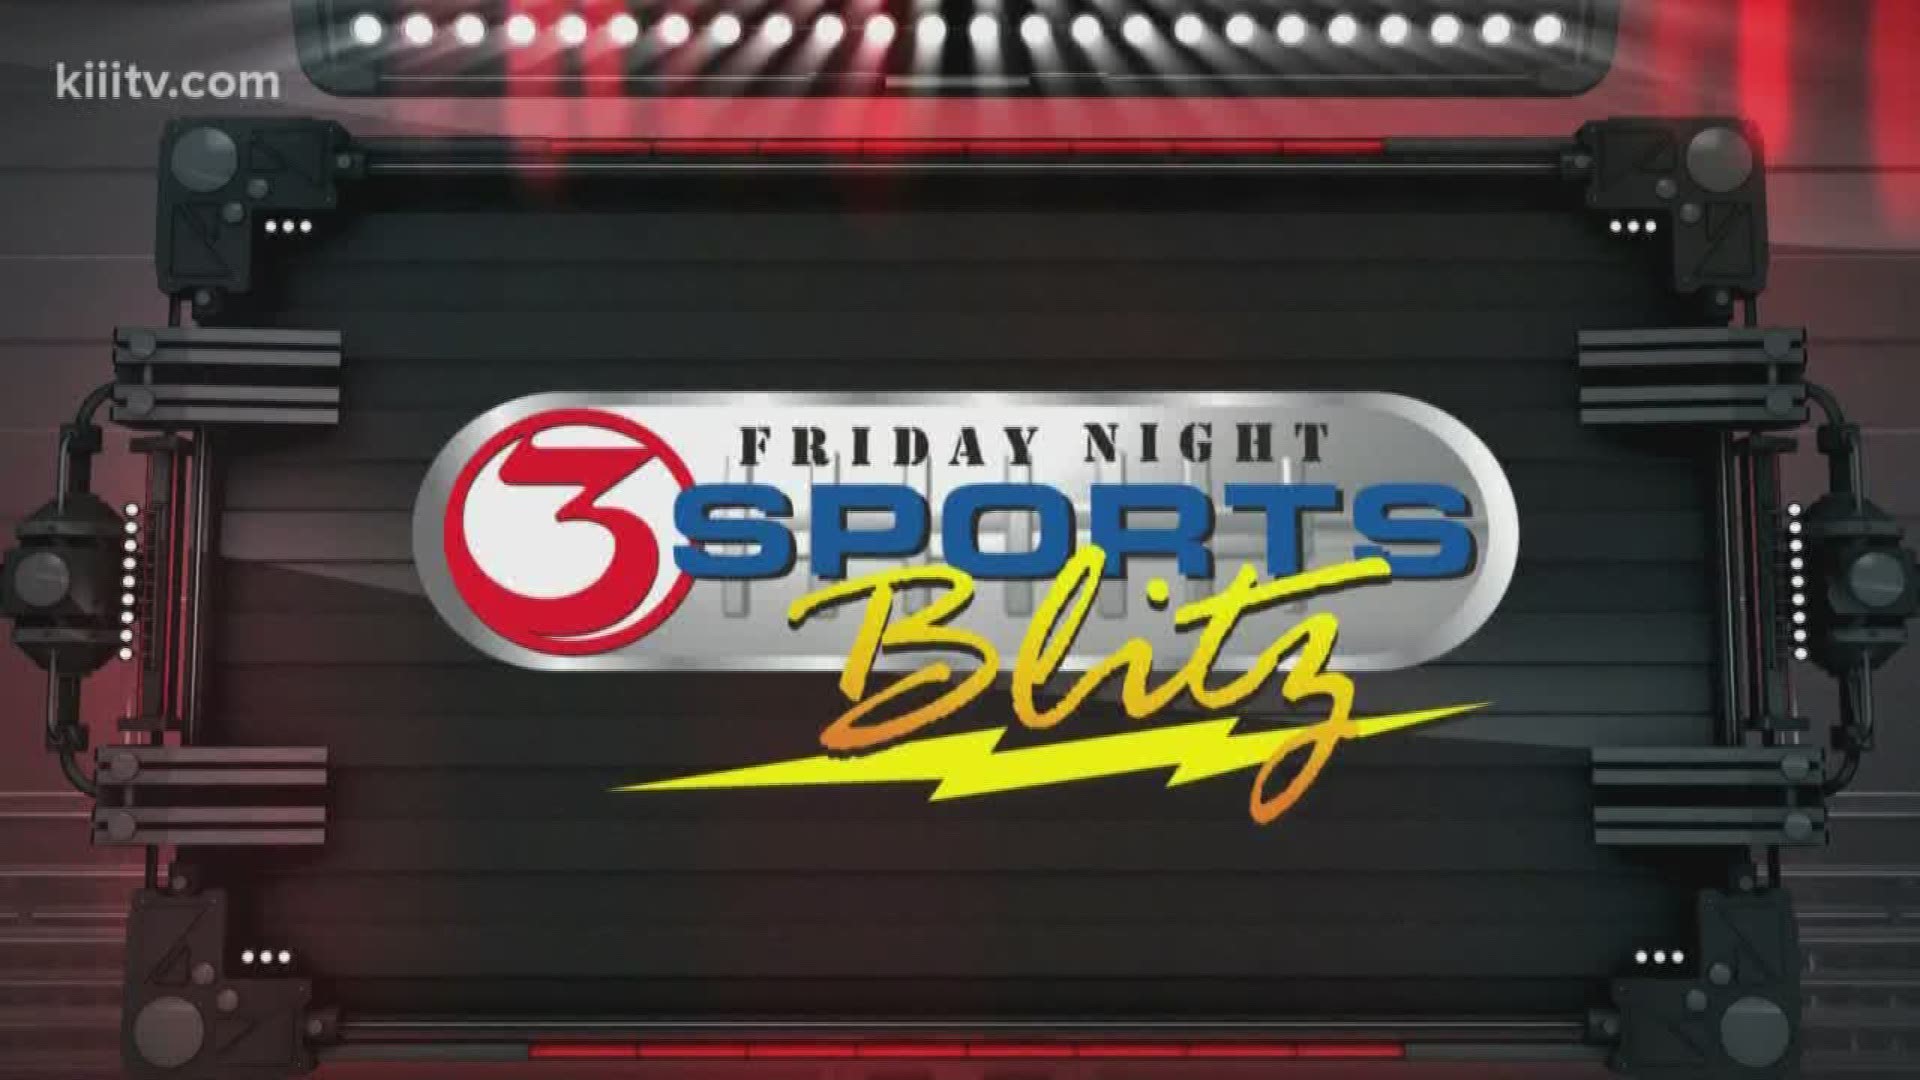 Blitz Week 2 - Part 2 includes highlights of:
- Gregory-Portland's win over Victoria East 29-7
- King's loss to PSJA 51-14
- Refugio's win over Goliad 35-6
- West Oso's win over Taft 36-28